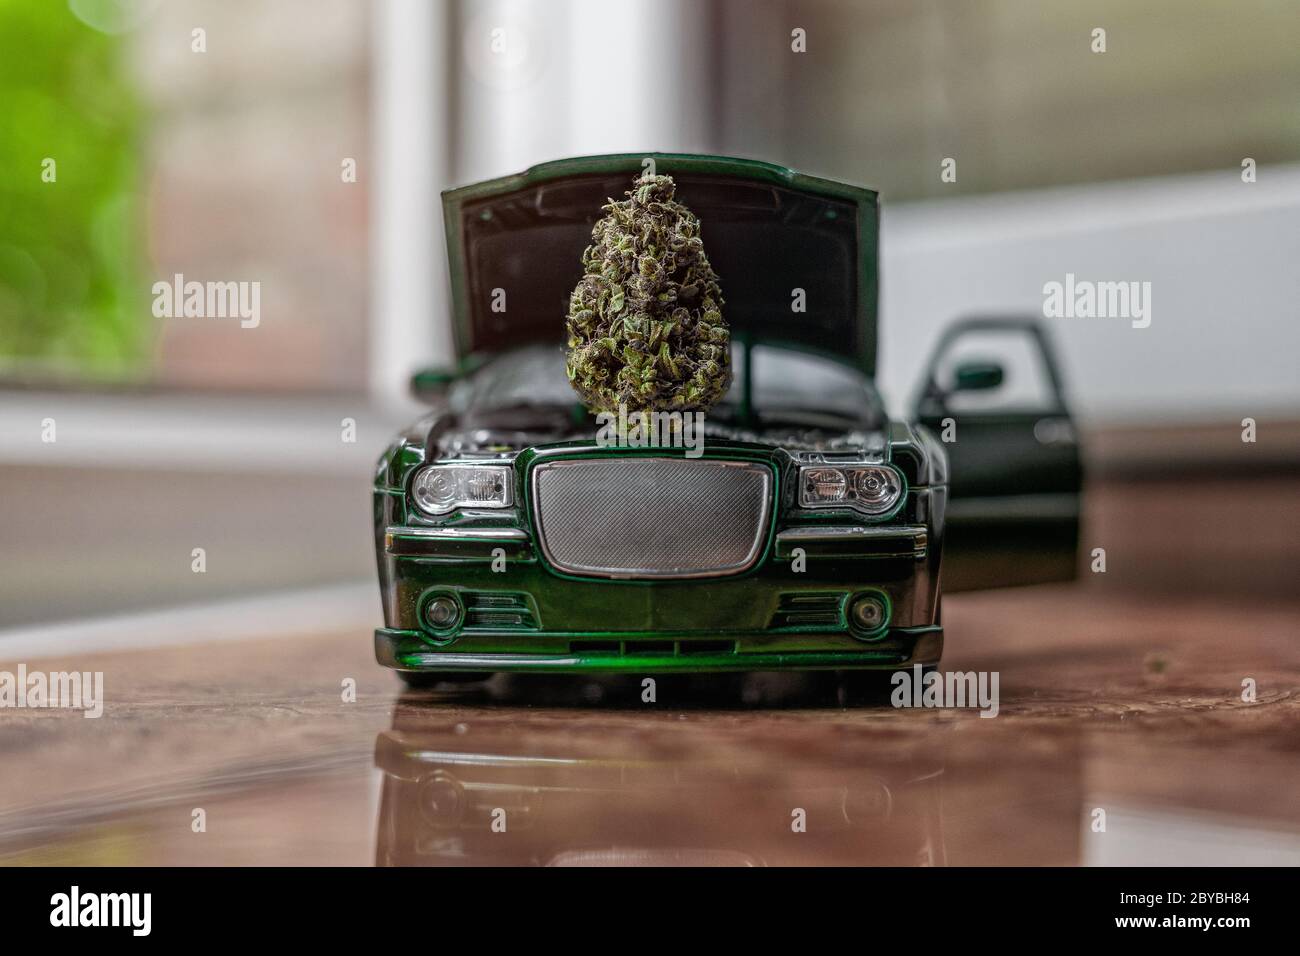 Large trichomes bud of marijuana under the hood of a small car model. Cannabis girl scout cookies, creative Stock Photo